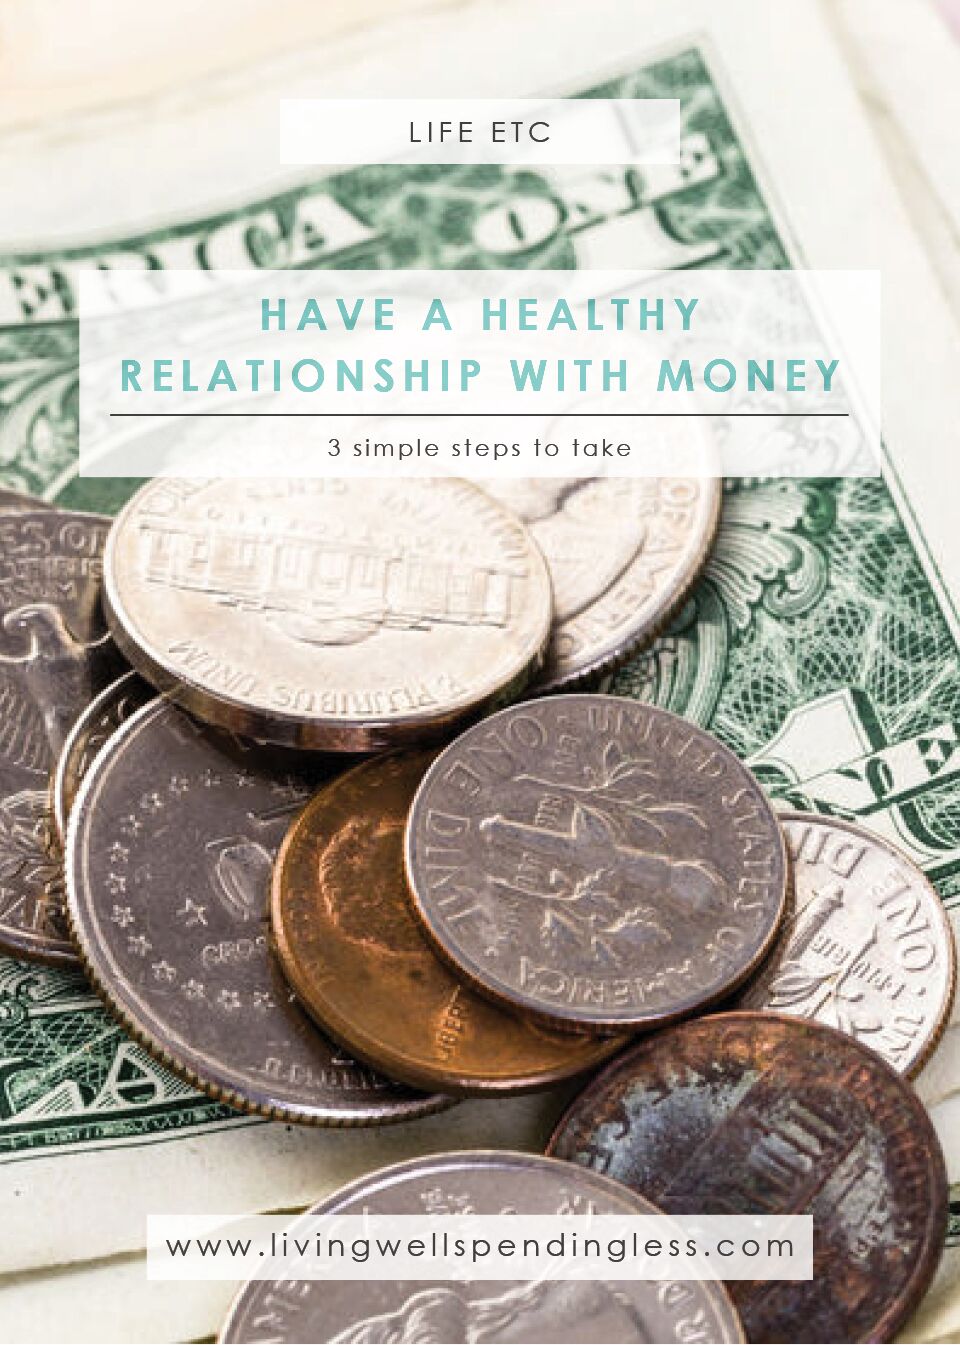 How to Have a Healthy Relationship With Money | Your Relationship with Money | Improve Your Relationship With Money